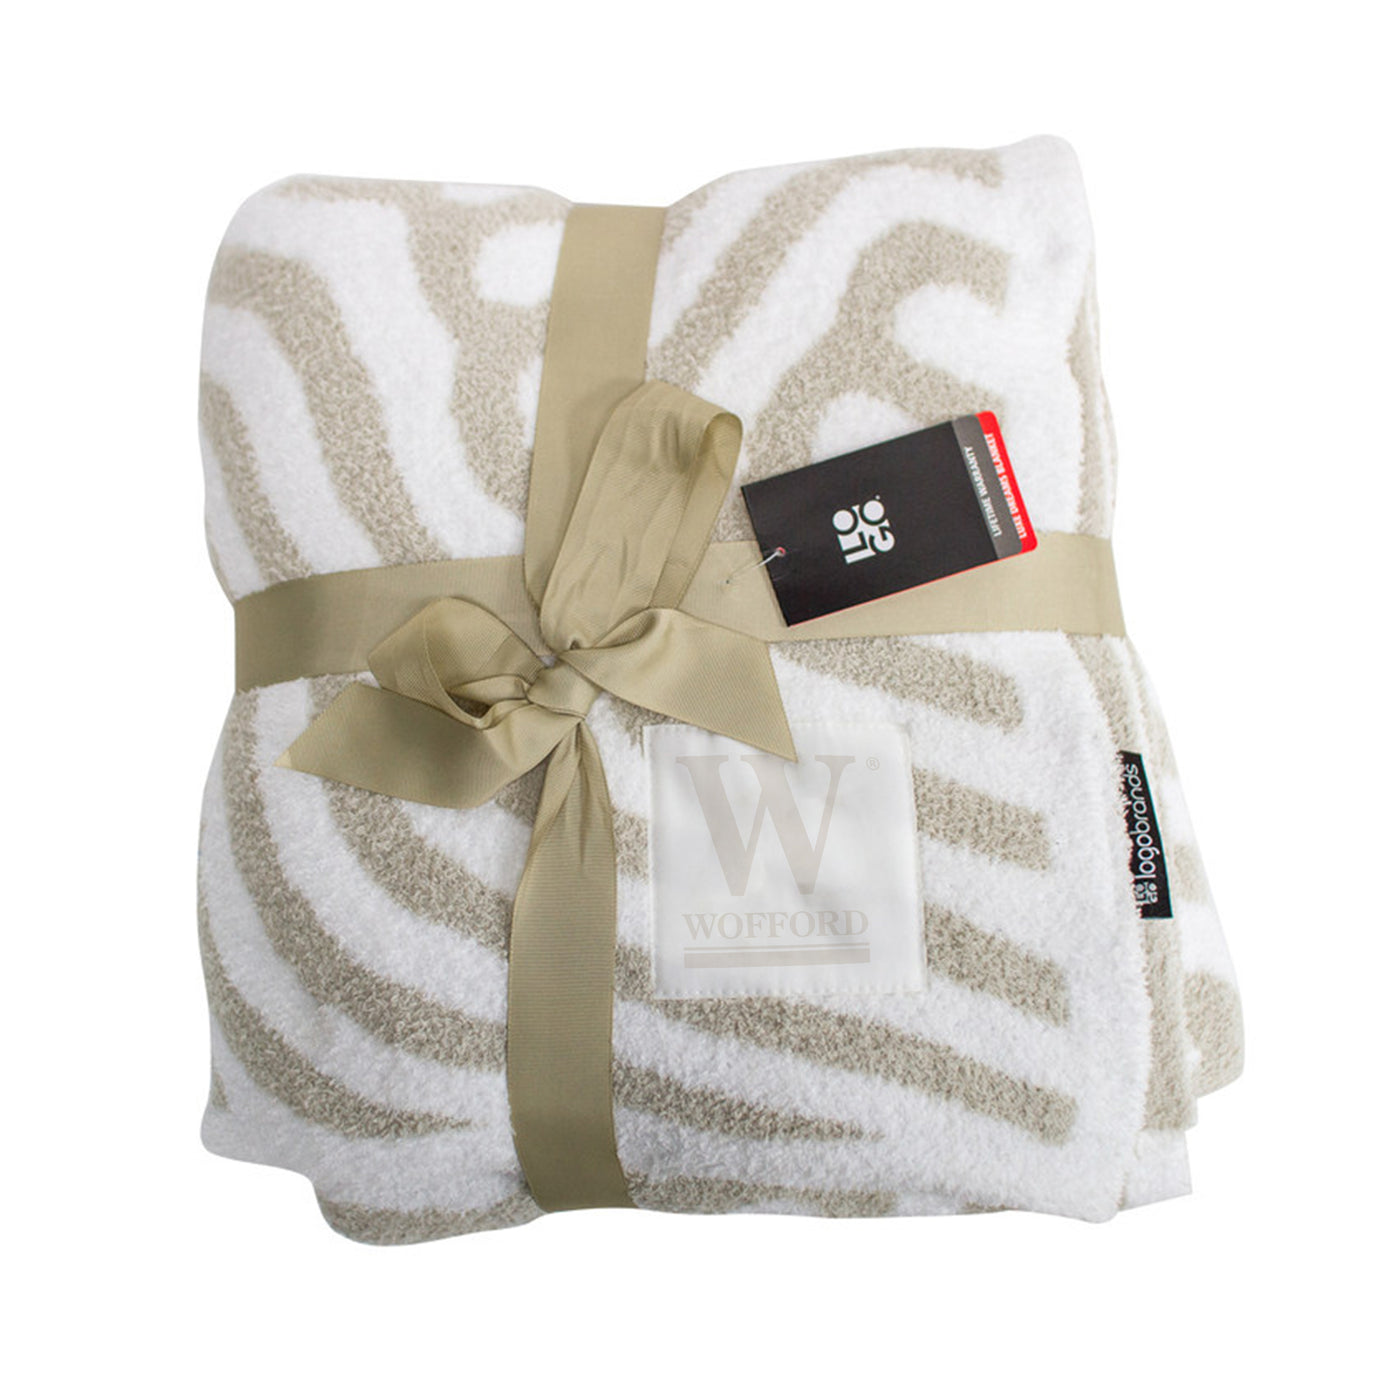 Wofford Luxe Dreams Throw